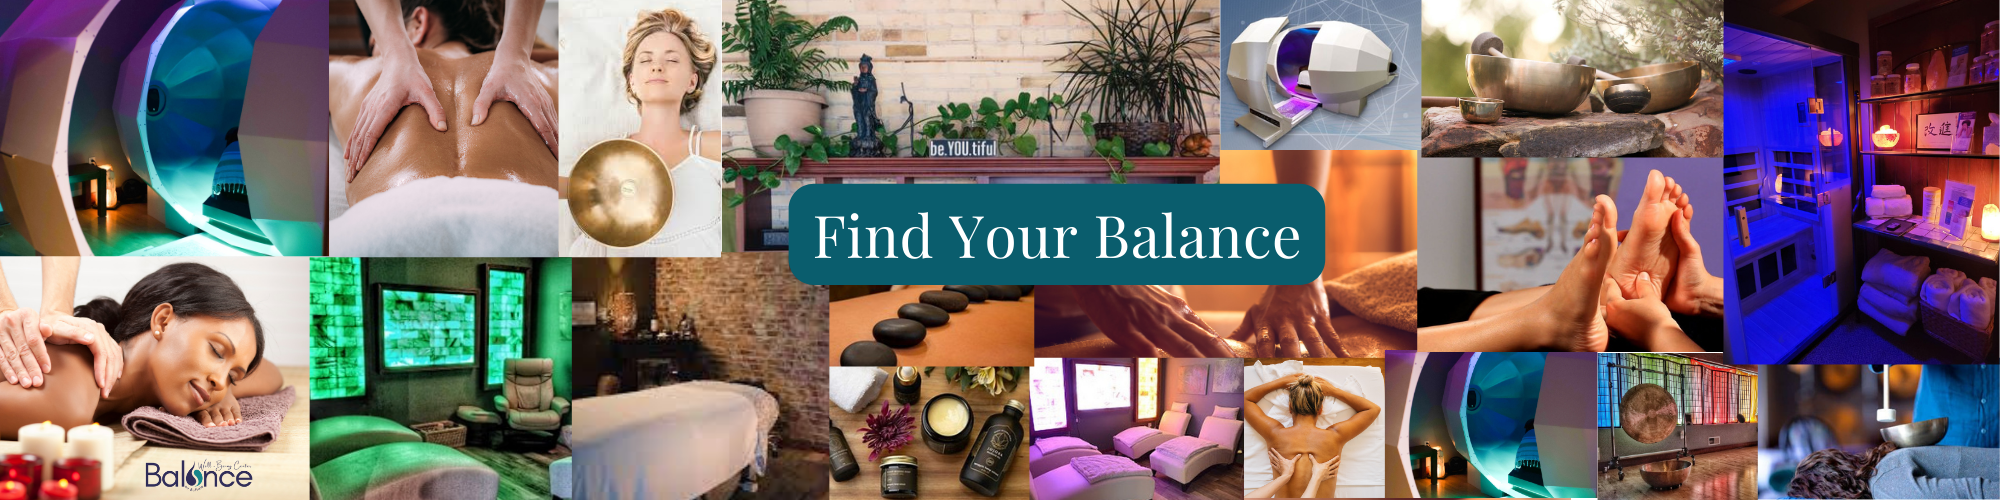 Find your Balance FB Cover (8.166 × 2.5 in) (10 × 2.5 in) (1).png